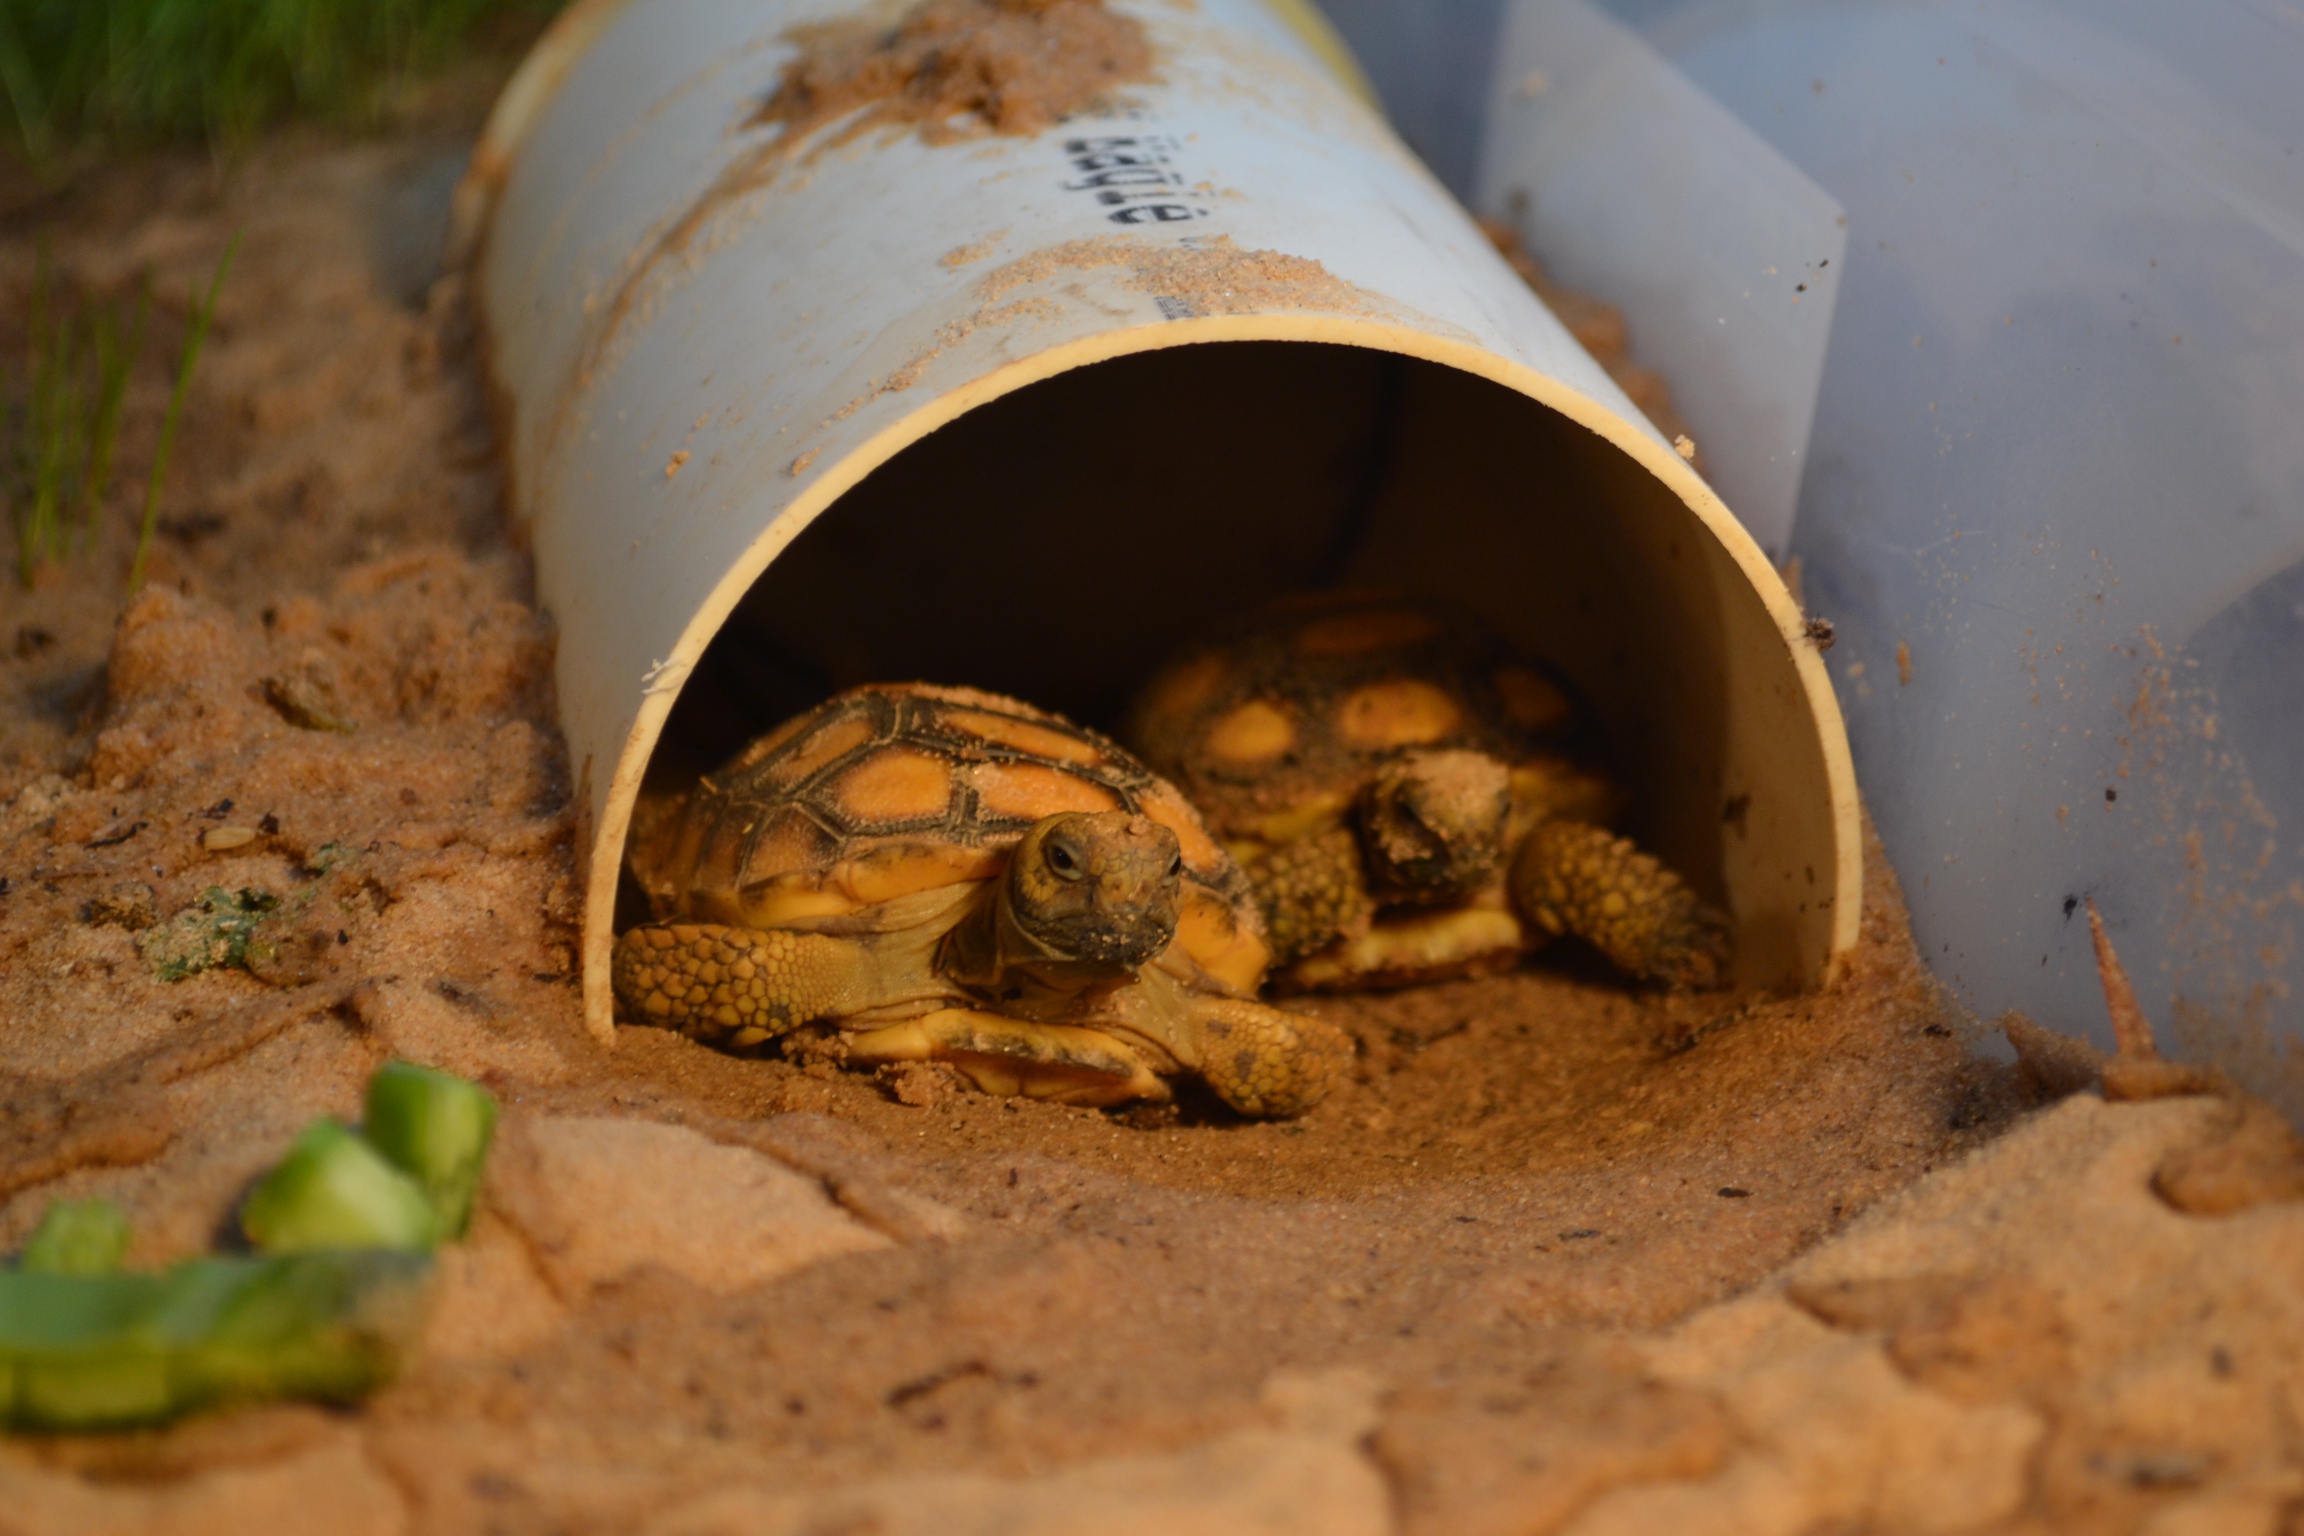 Two gopher tortoise hatchlings in a tunnel.